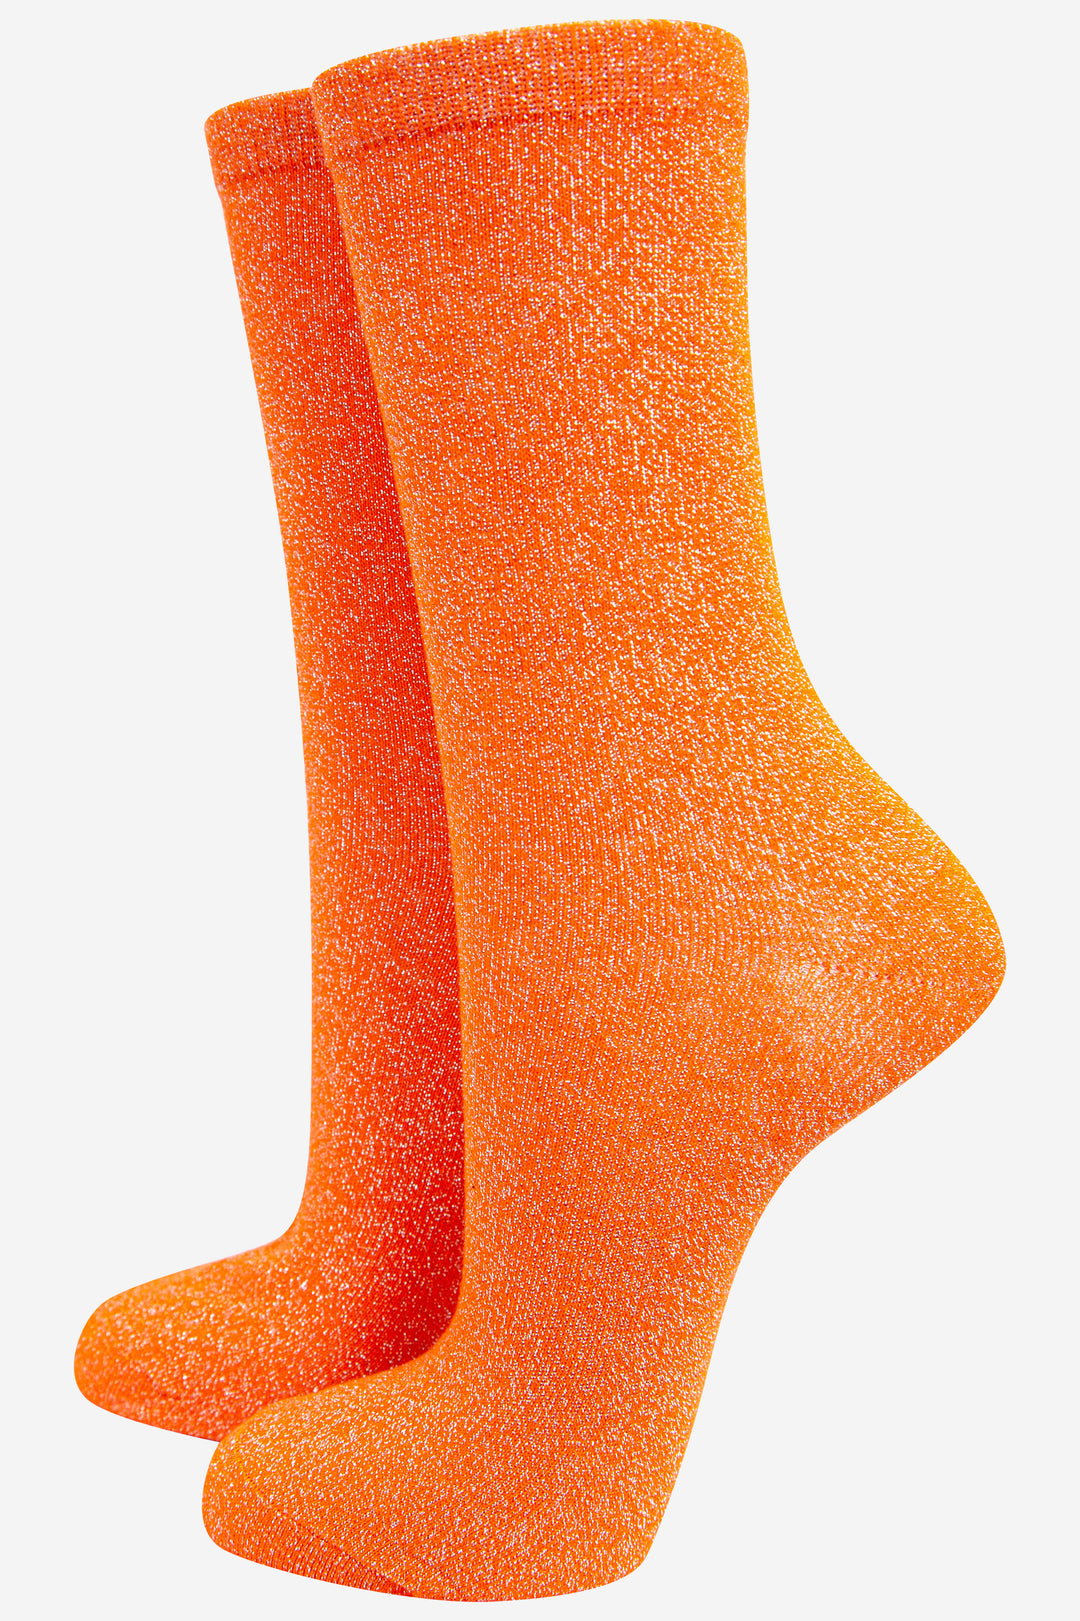 orange ankle socks with an all over silver glitter sparkle